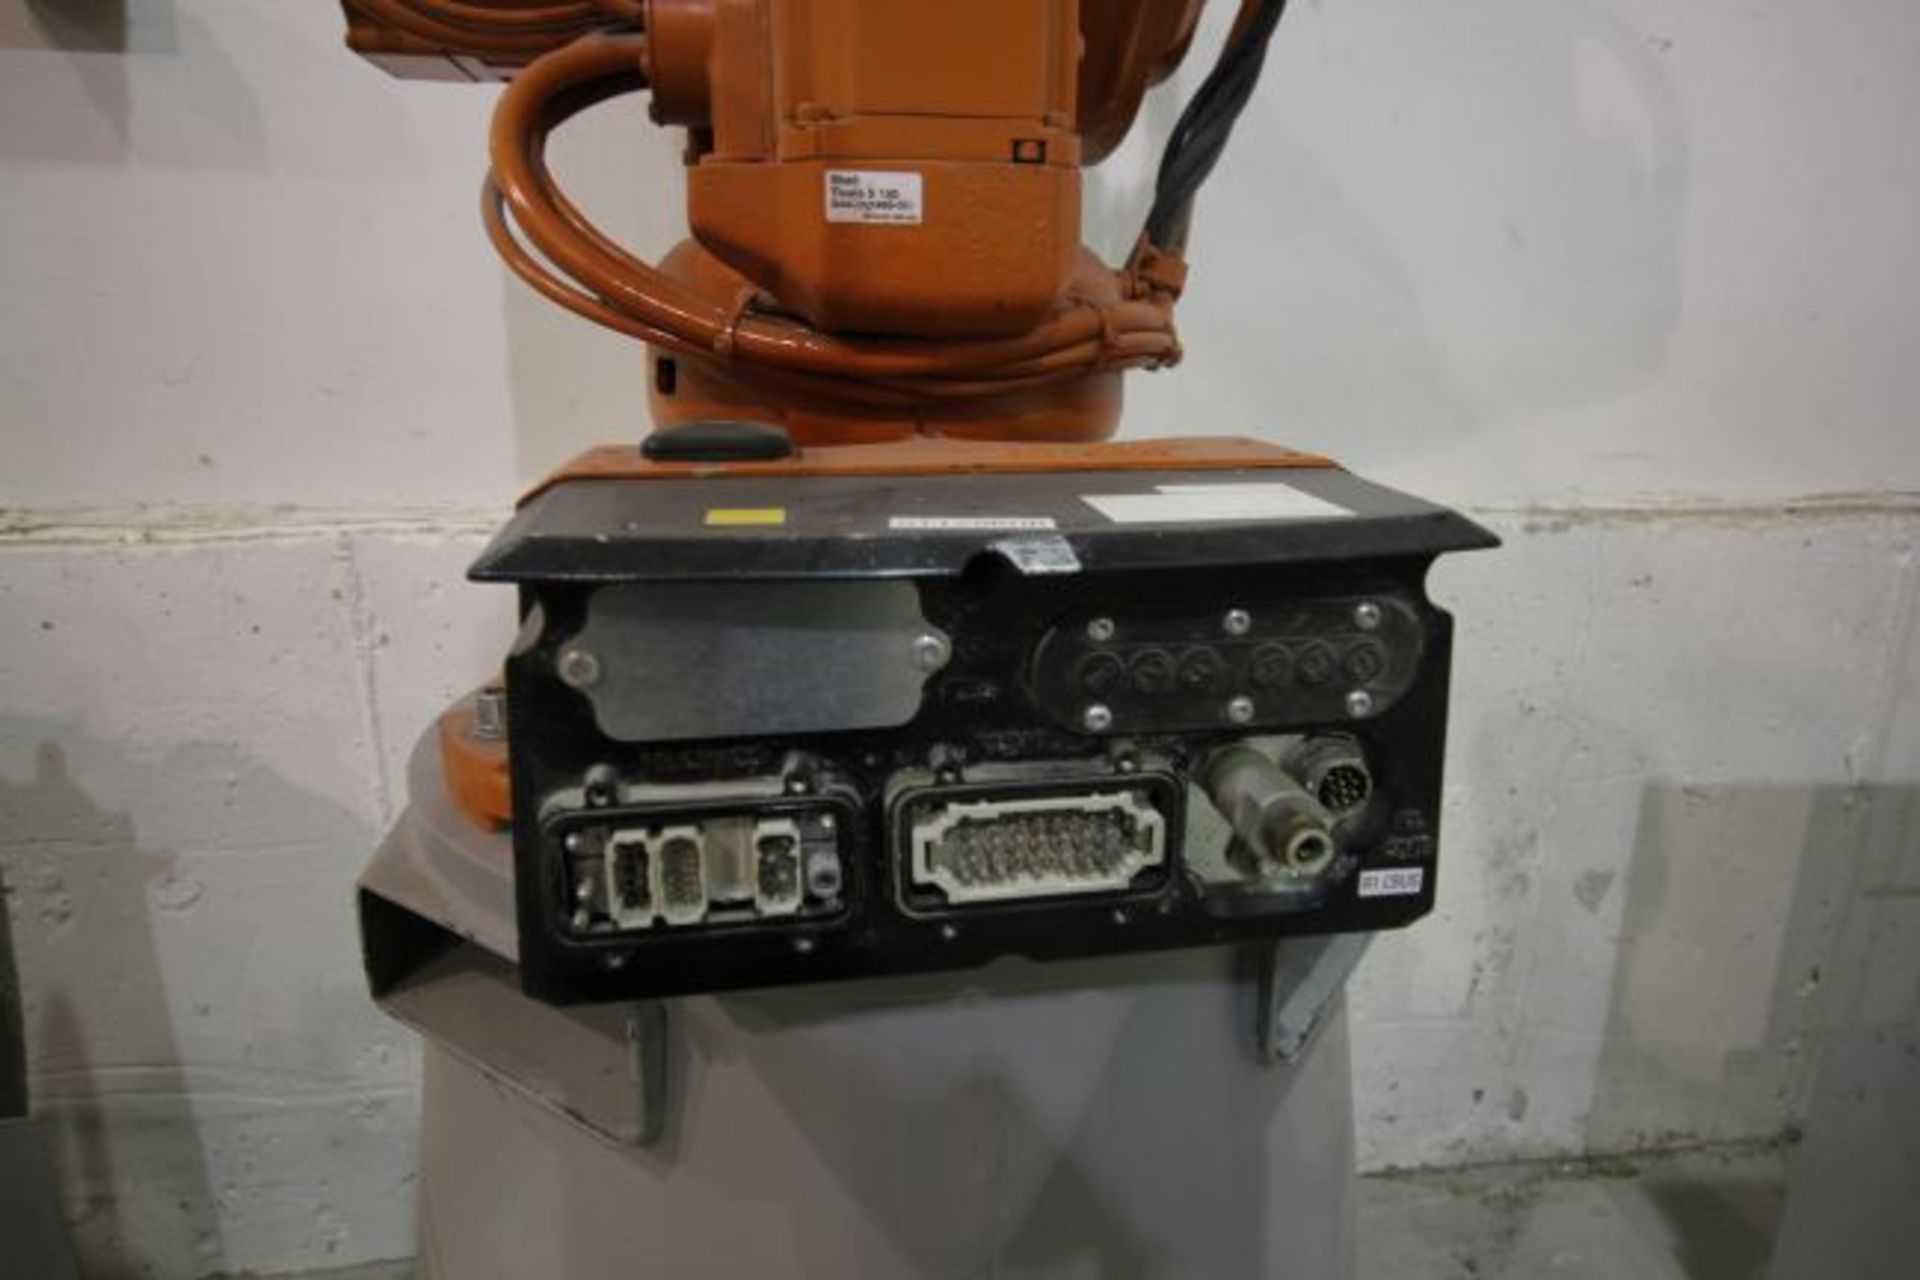 ABB ROBOT IRB 4600 2.05/45KG WITH IRC5 CONTROLS, YEAR 2011, SN 46-65751CABLES, NO PENDANT - Image 4 of 8